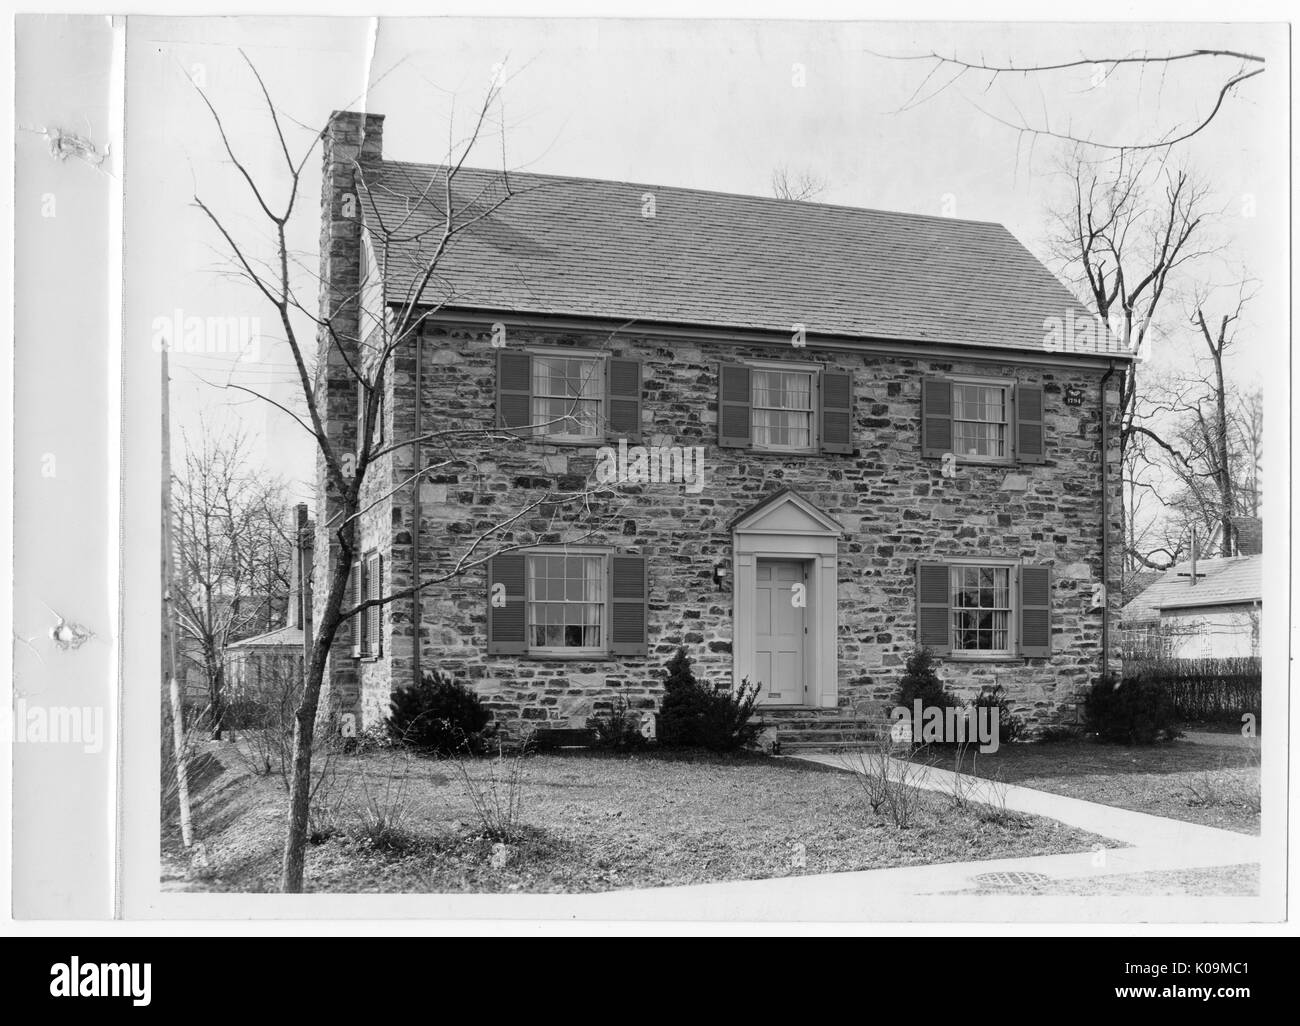 Landscape shot of a two-story brick house with a chimney, a paved sidewalk and path leading to the front door, sparse landscaping in front of the house, Roland Park/Guilford, Baltimore, Maryland, 1910. This image is from a series documenting the construction and sale of homes in the Roland Park/Guilford neighborhood of Baltimore, a streetcar suburb and one of the first planned communities in the United States. The neighborhood was segregated, and is considered an early example of the enforcement of racial segregation through the use of restricted covenants. Stock Photo